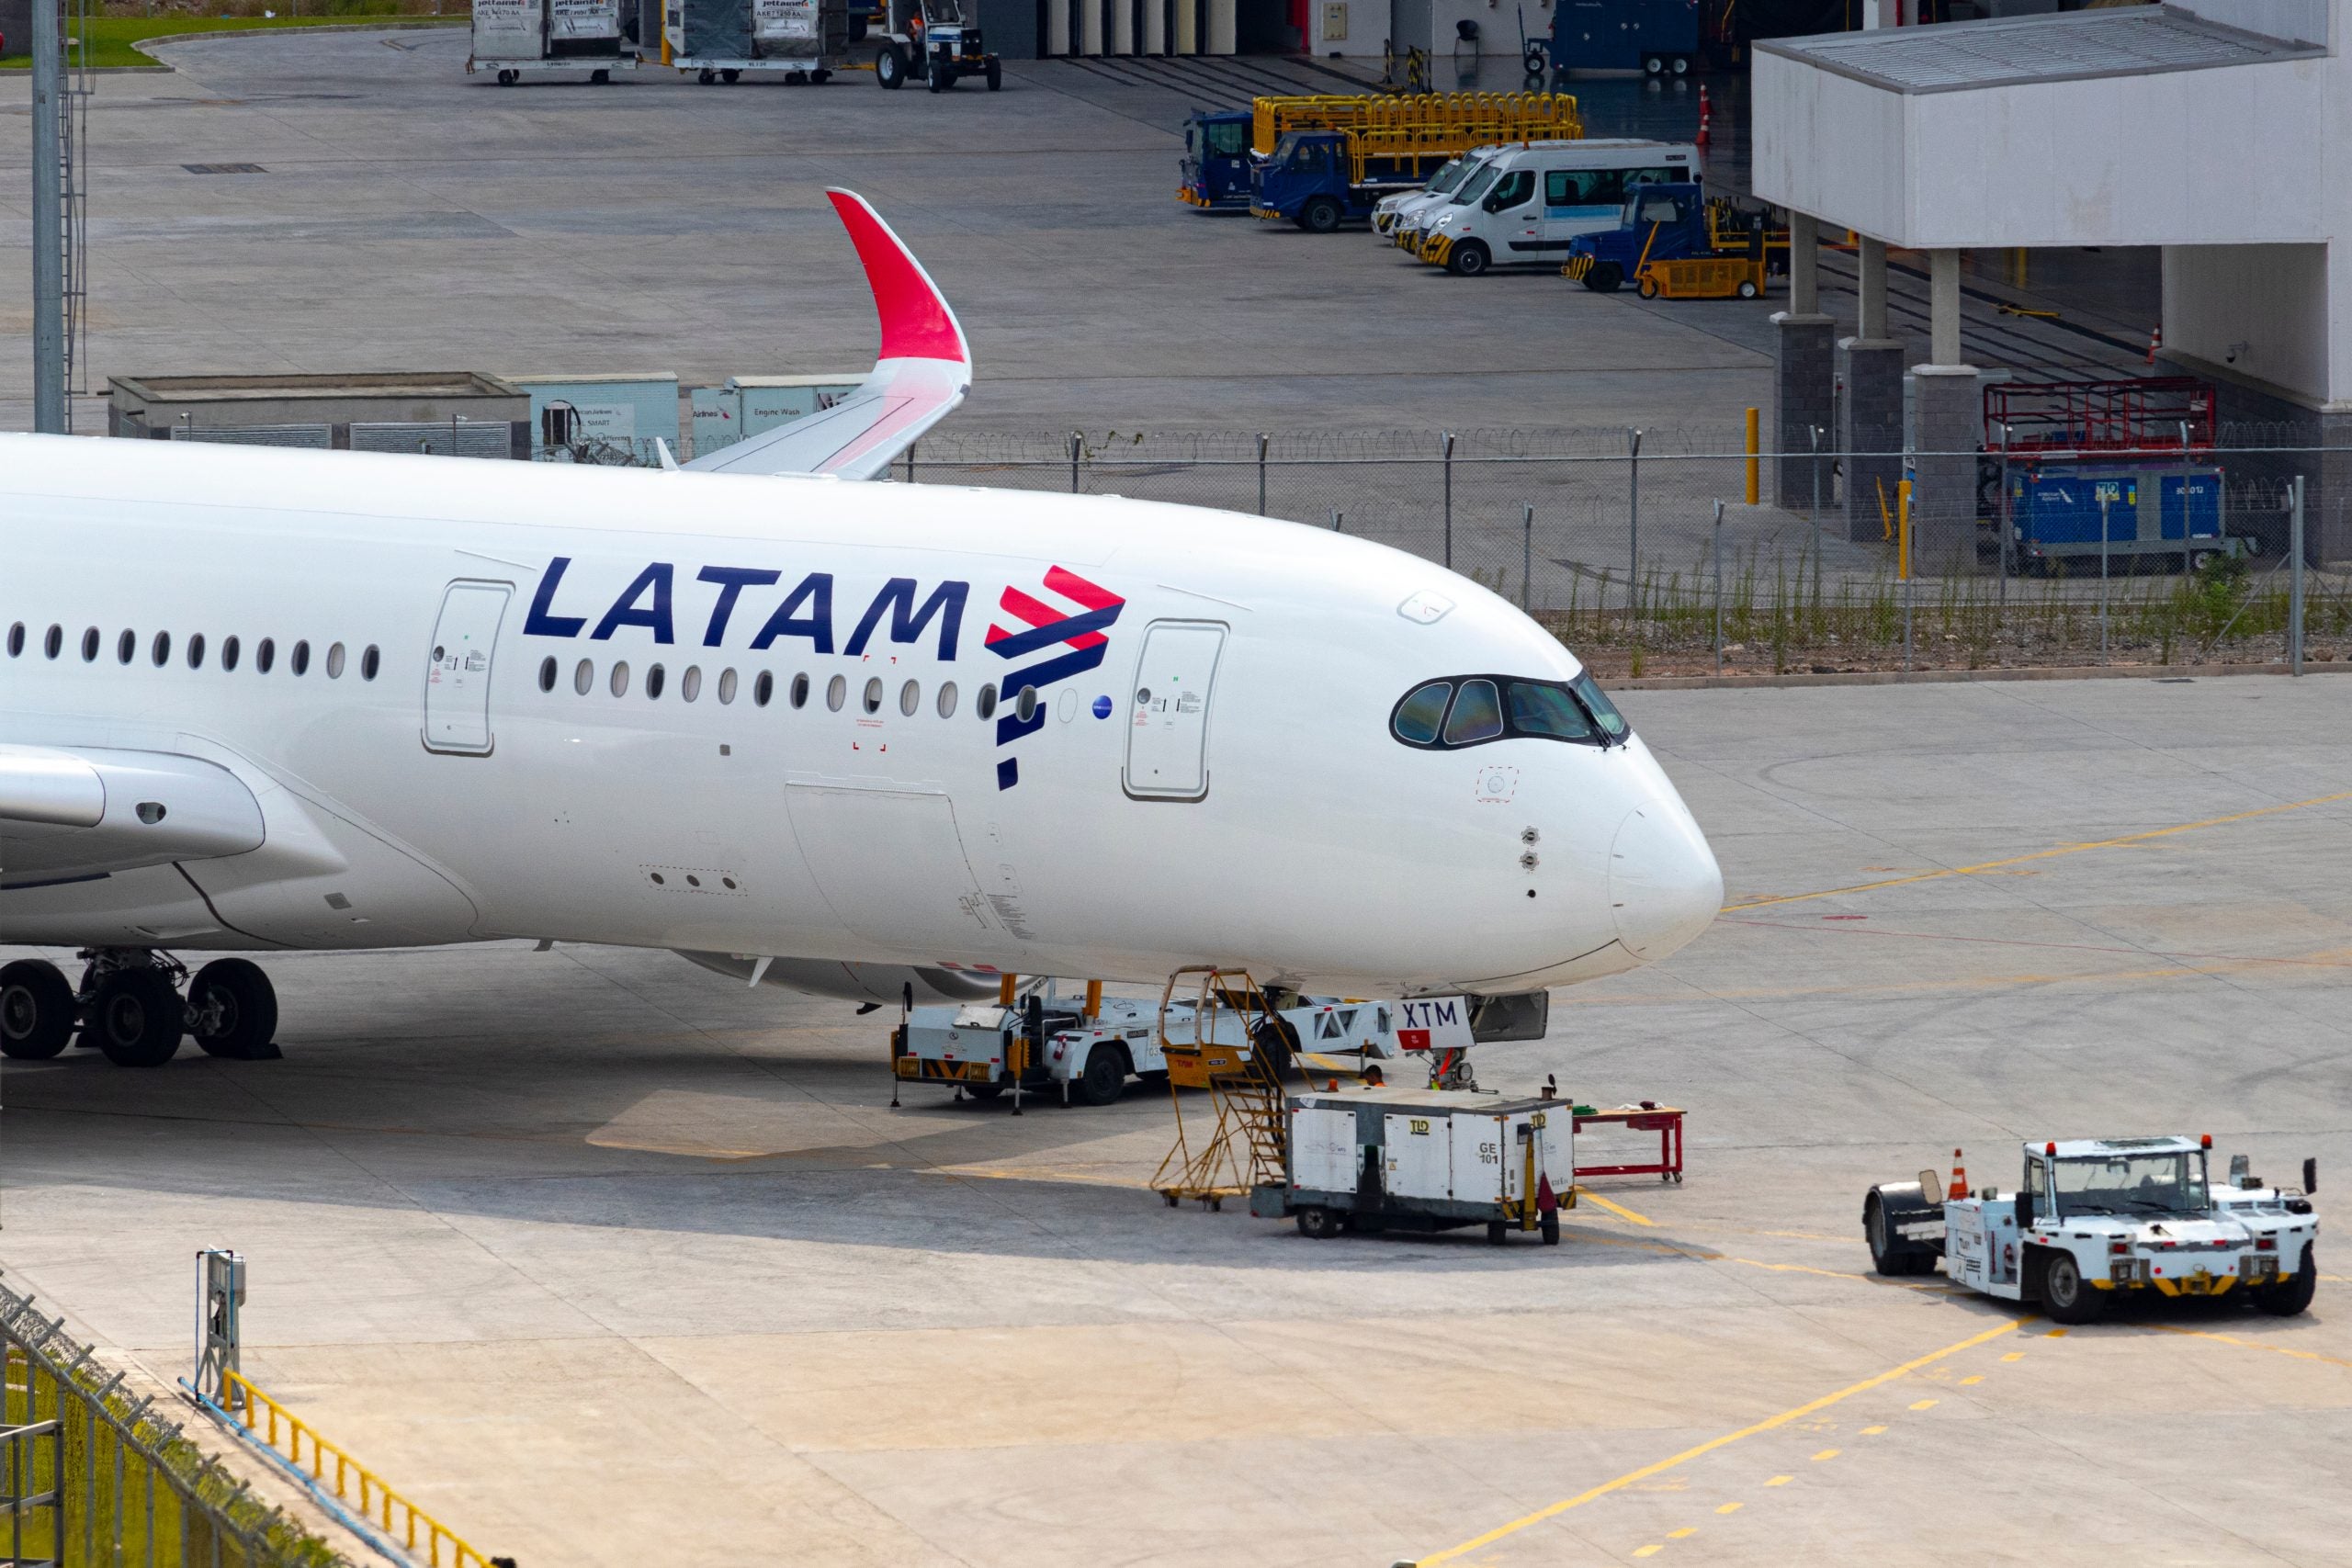 LATAM to retire Airbus A350 fleet amid cost cuts